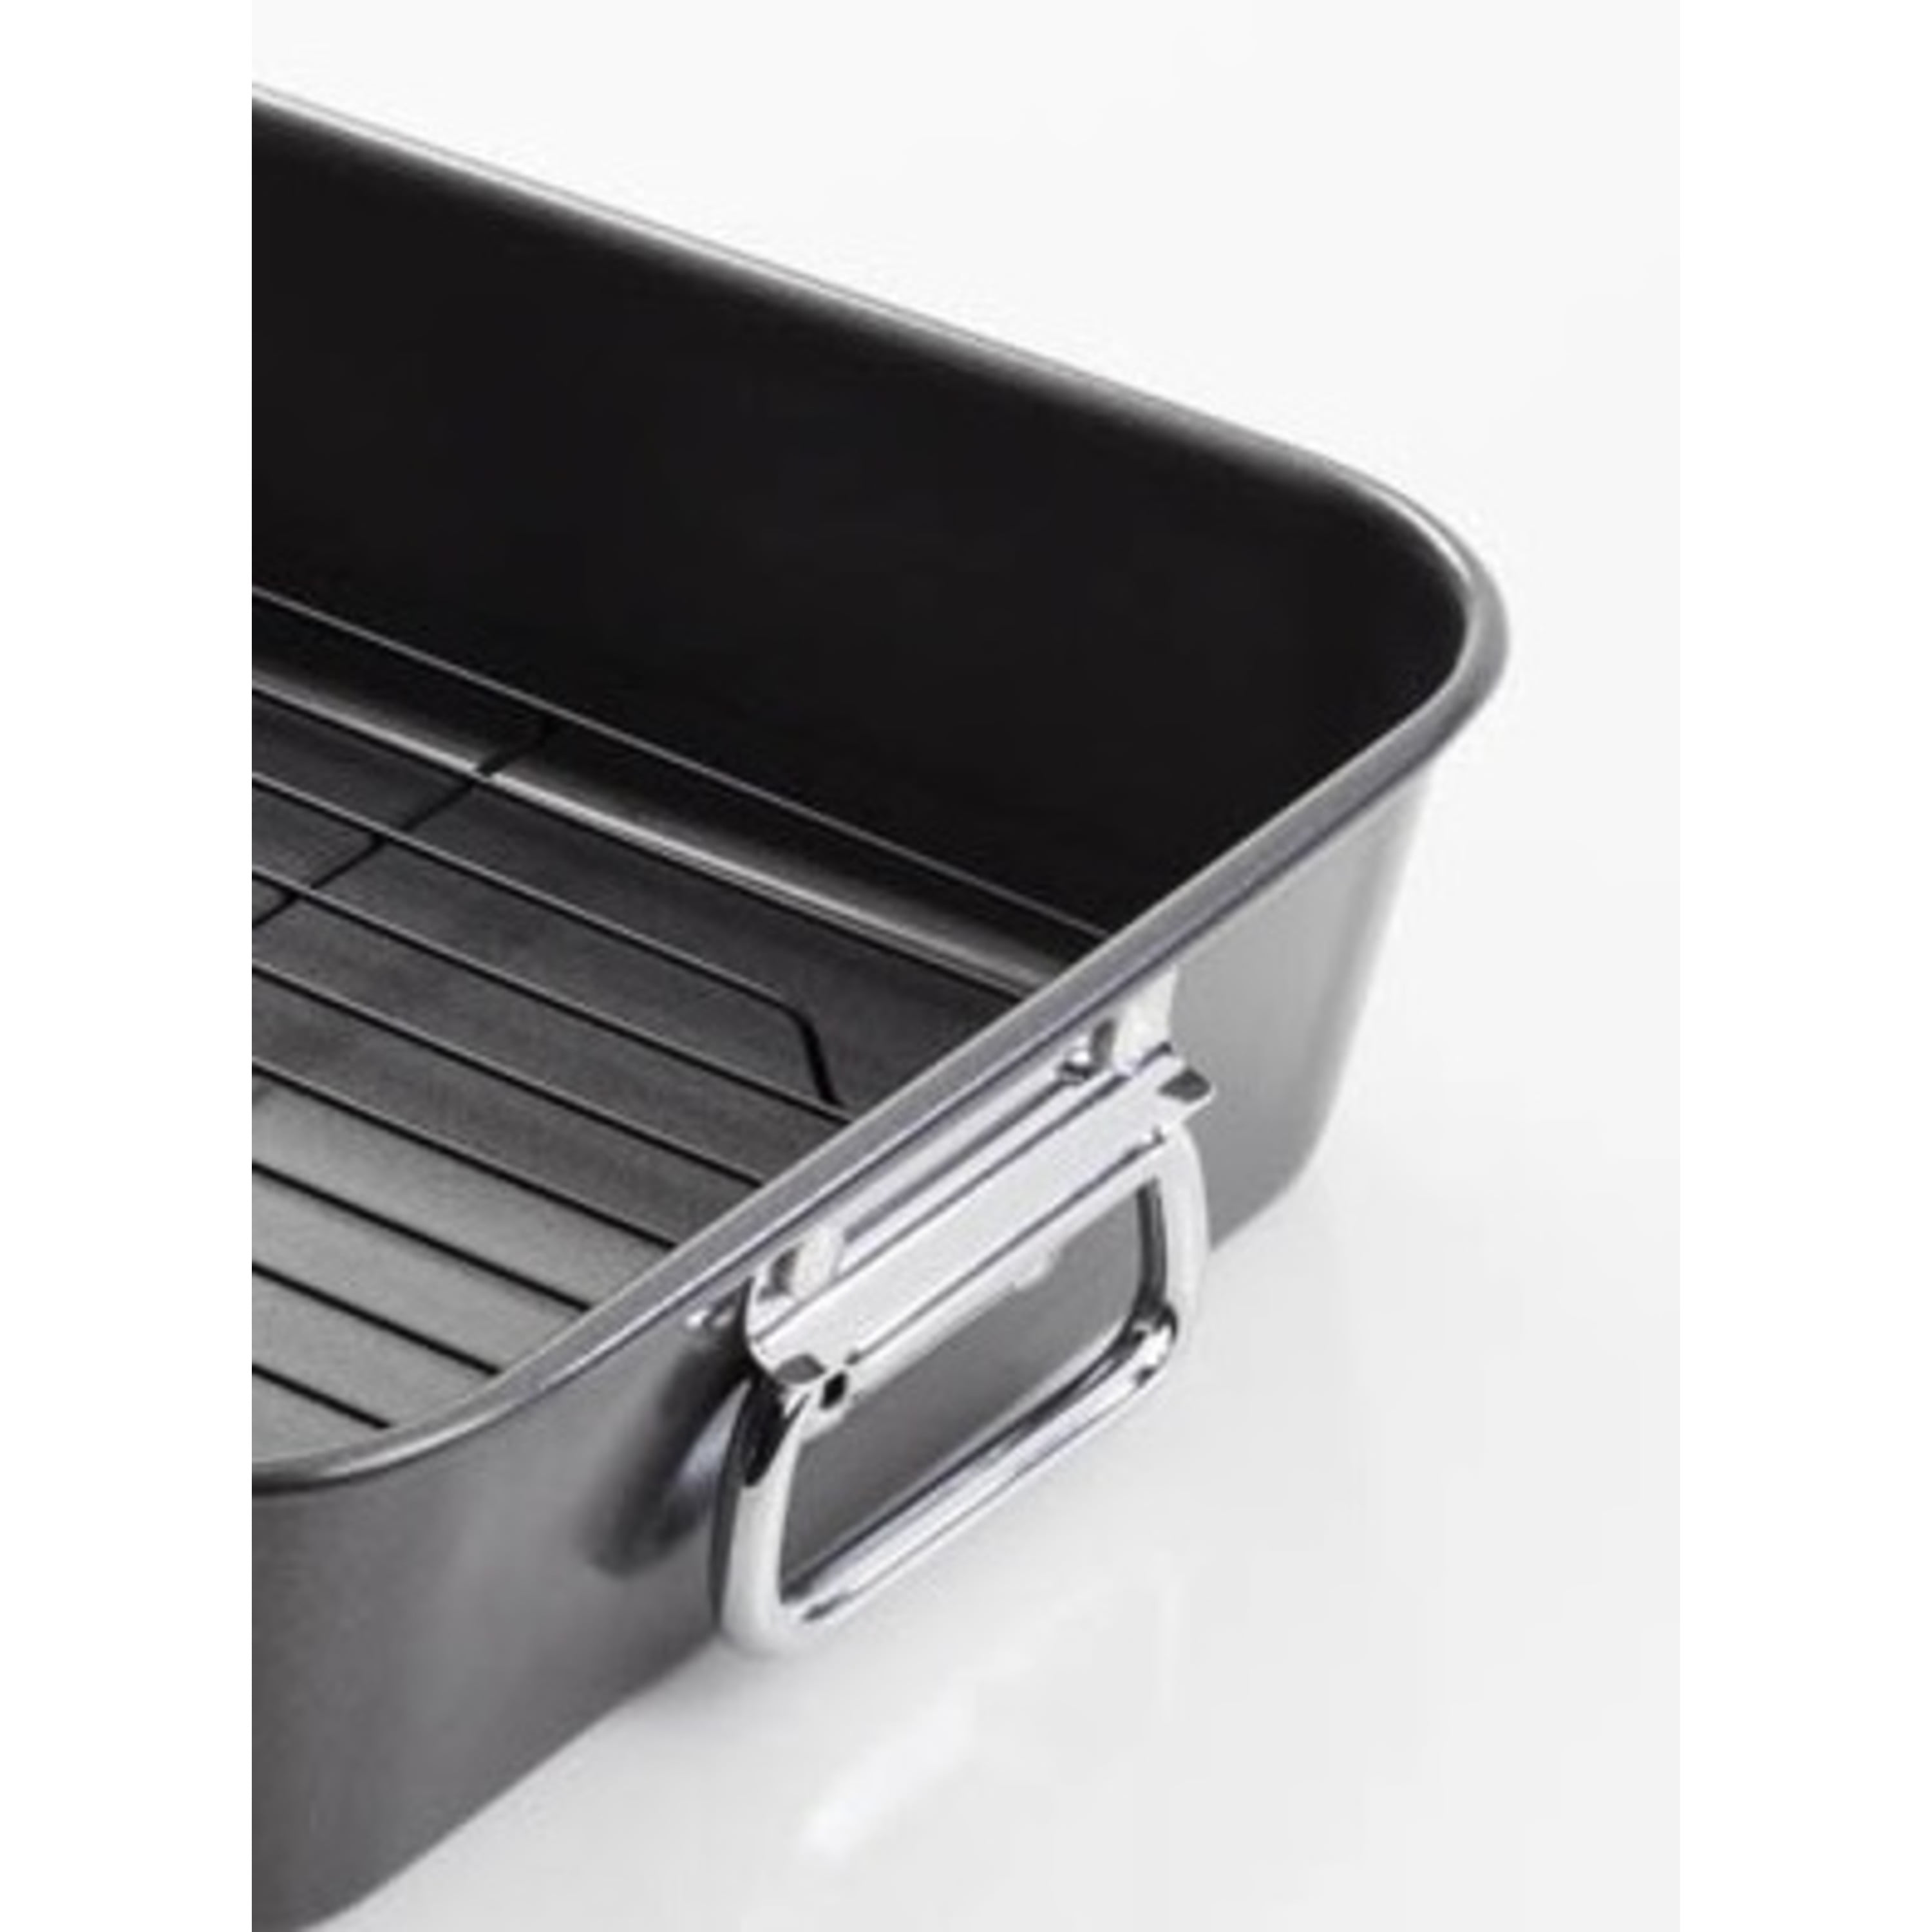 Judge H045 Extra Large Stainless Steel Roasting Pan with Rack, 36cm x 26cm  x 10cm, Oven Safe, Dishwasher Safe, Gift Box - 25 Year Guarantee